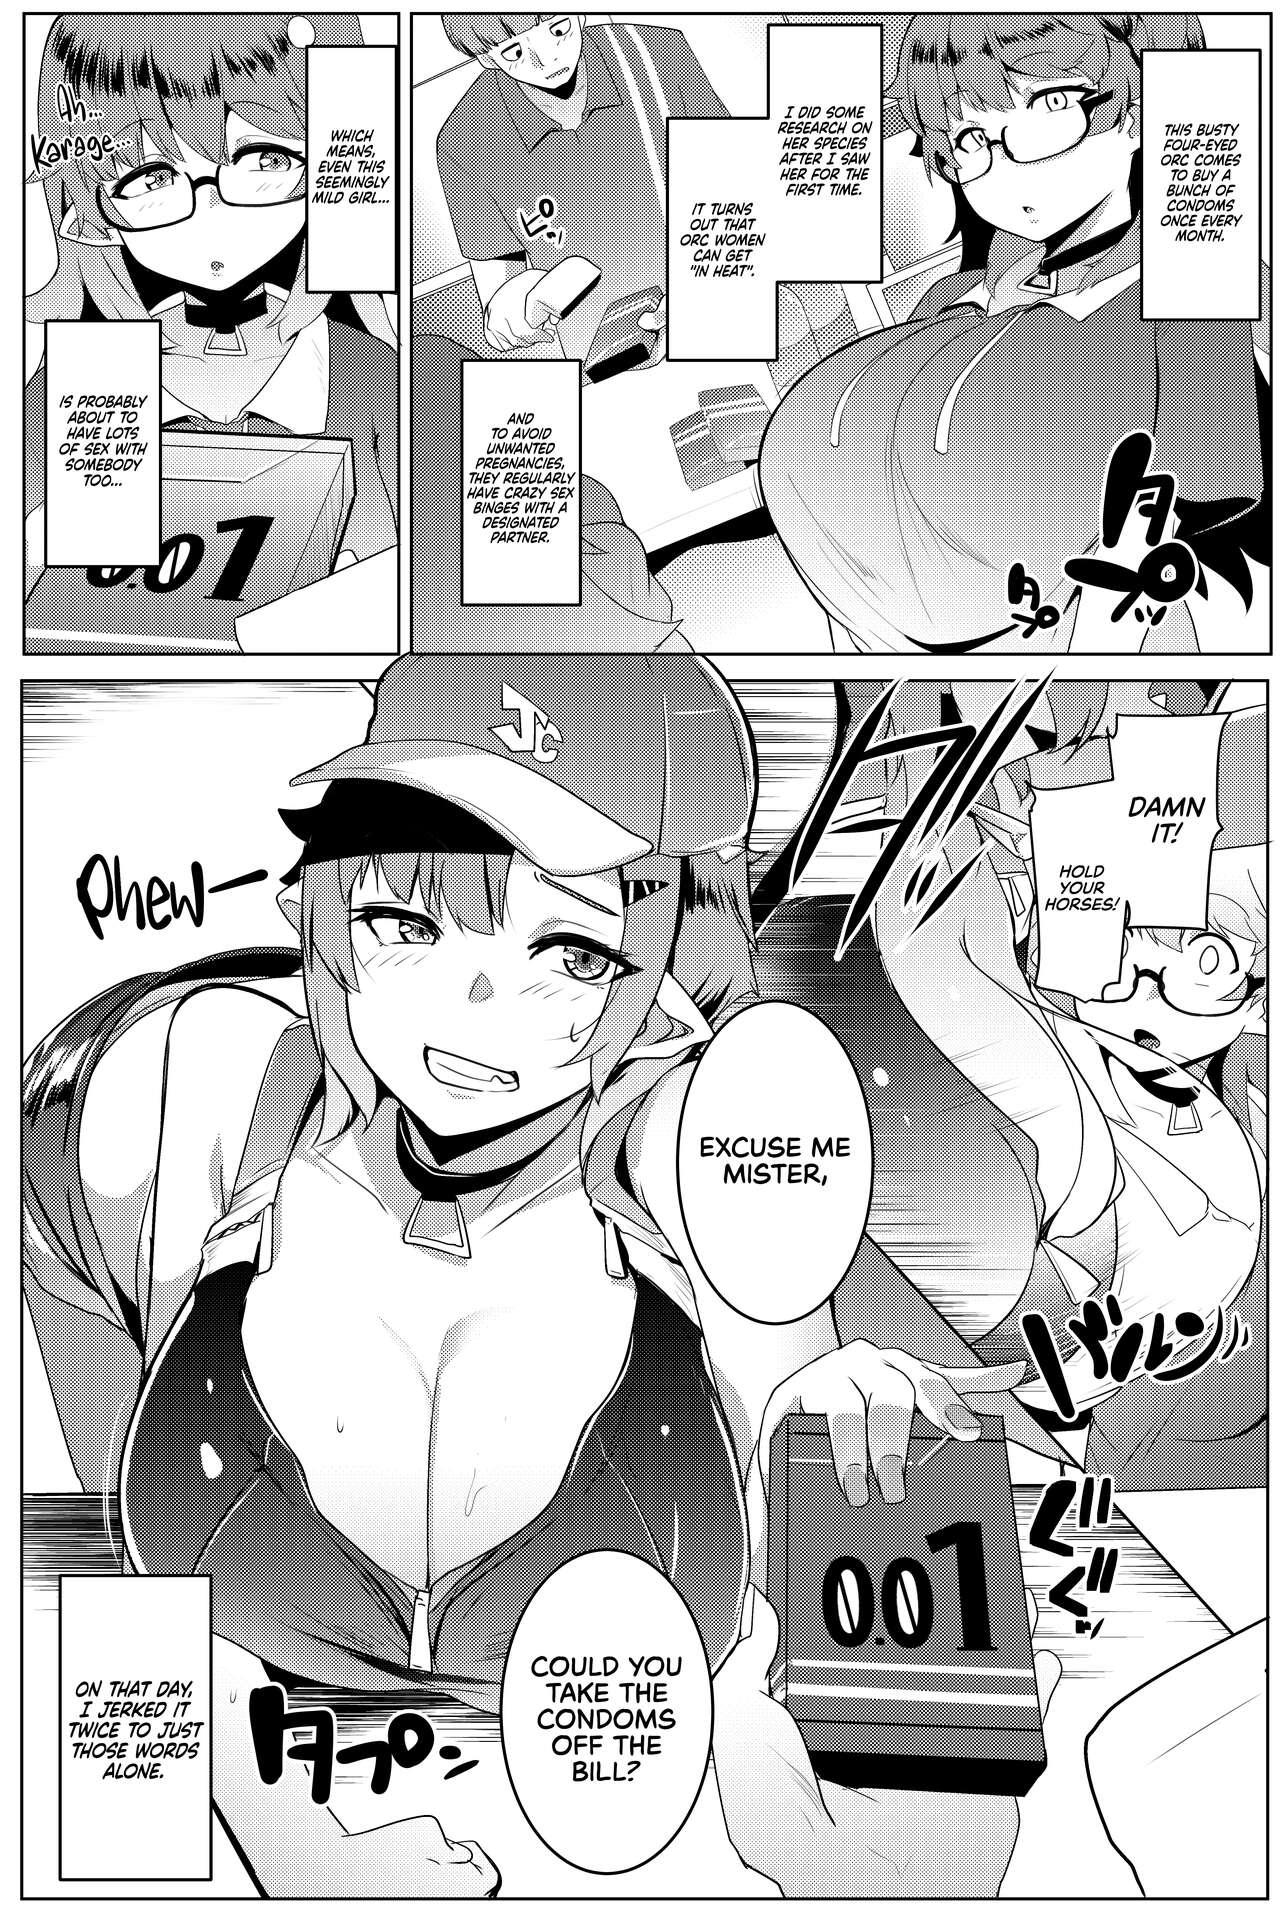 Shemales Imouto wa Mesu Orc 5 | My Little Sisters are Slutty Orcs 5 - Original Gay Amateur - Page 5